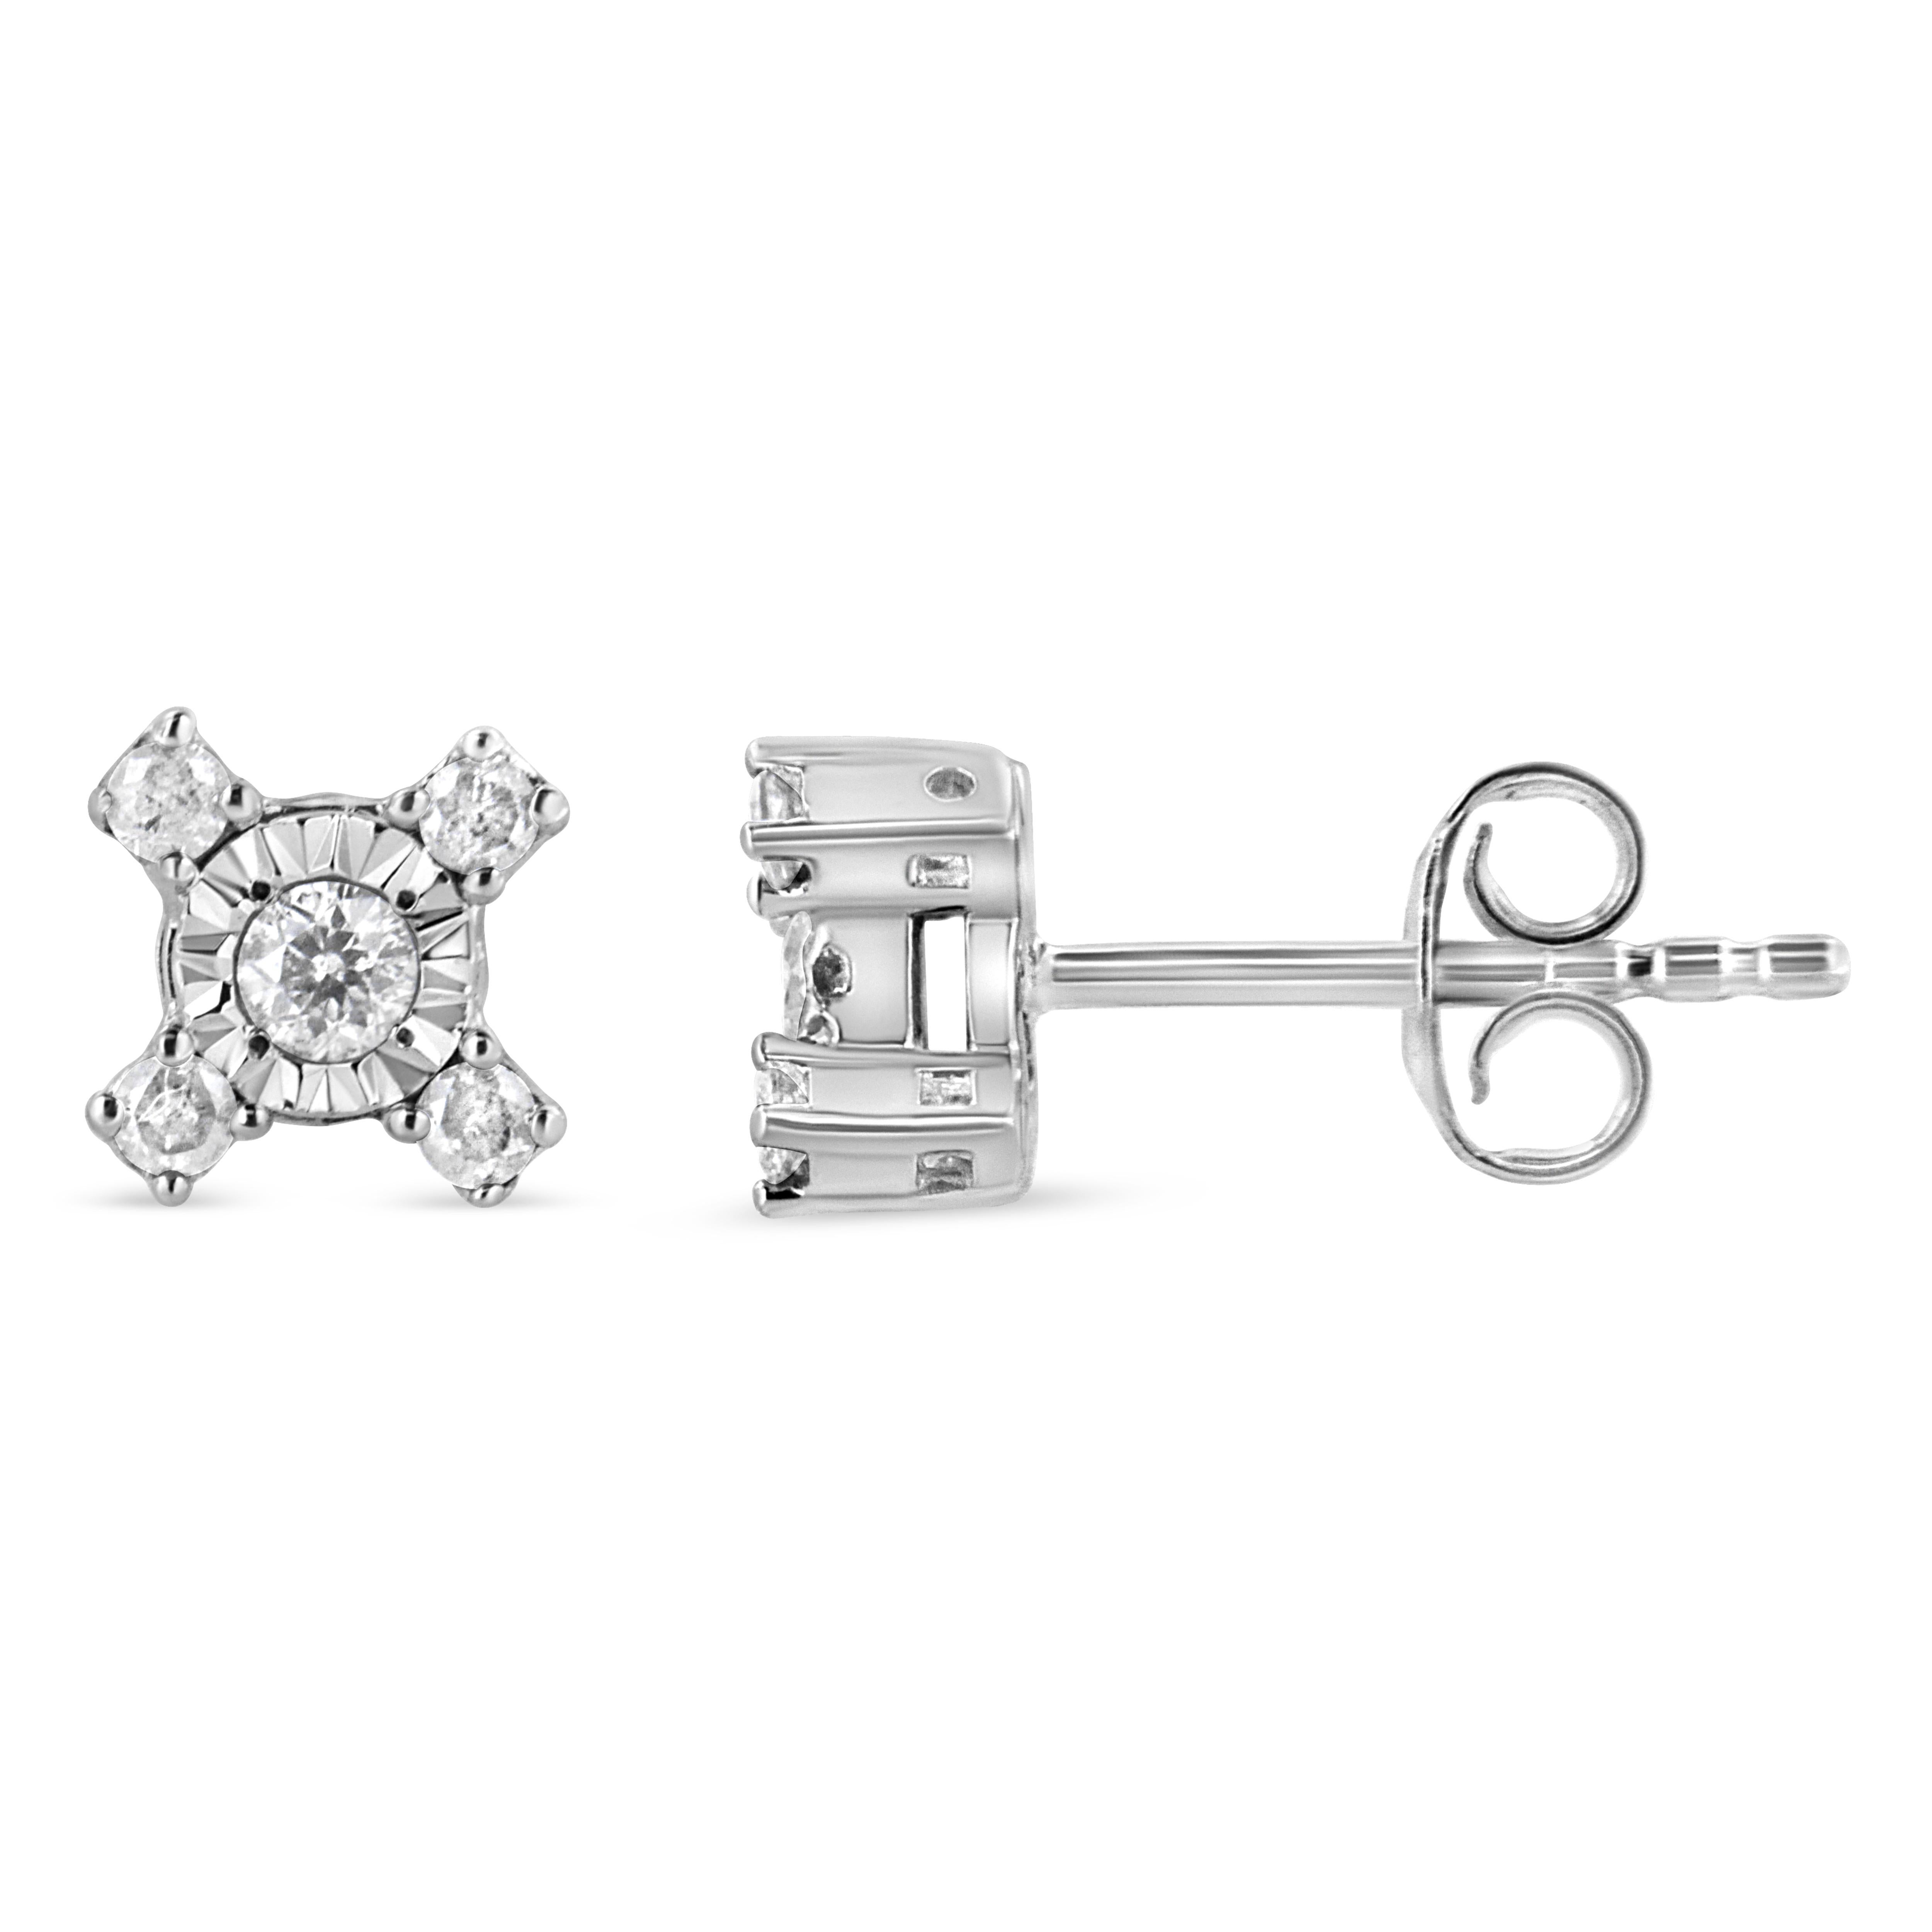 These earrings are unique twist on the classic everyday studs. A sparkling round-cut diamond is set in a miracle setting at the center of this piece, and four princess-cut diamonds frame the central motif creating a stunning 